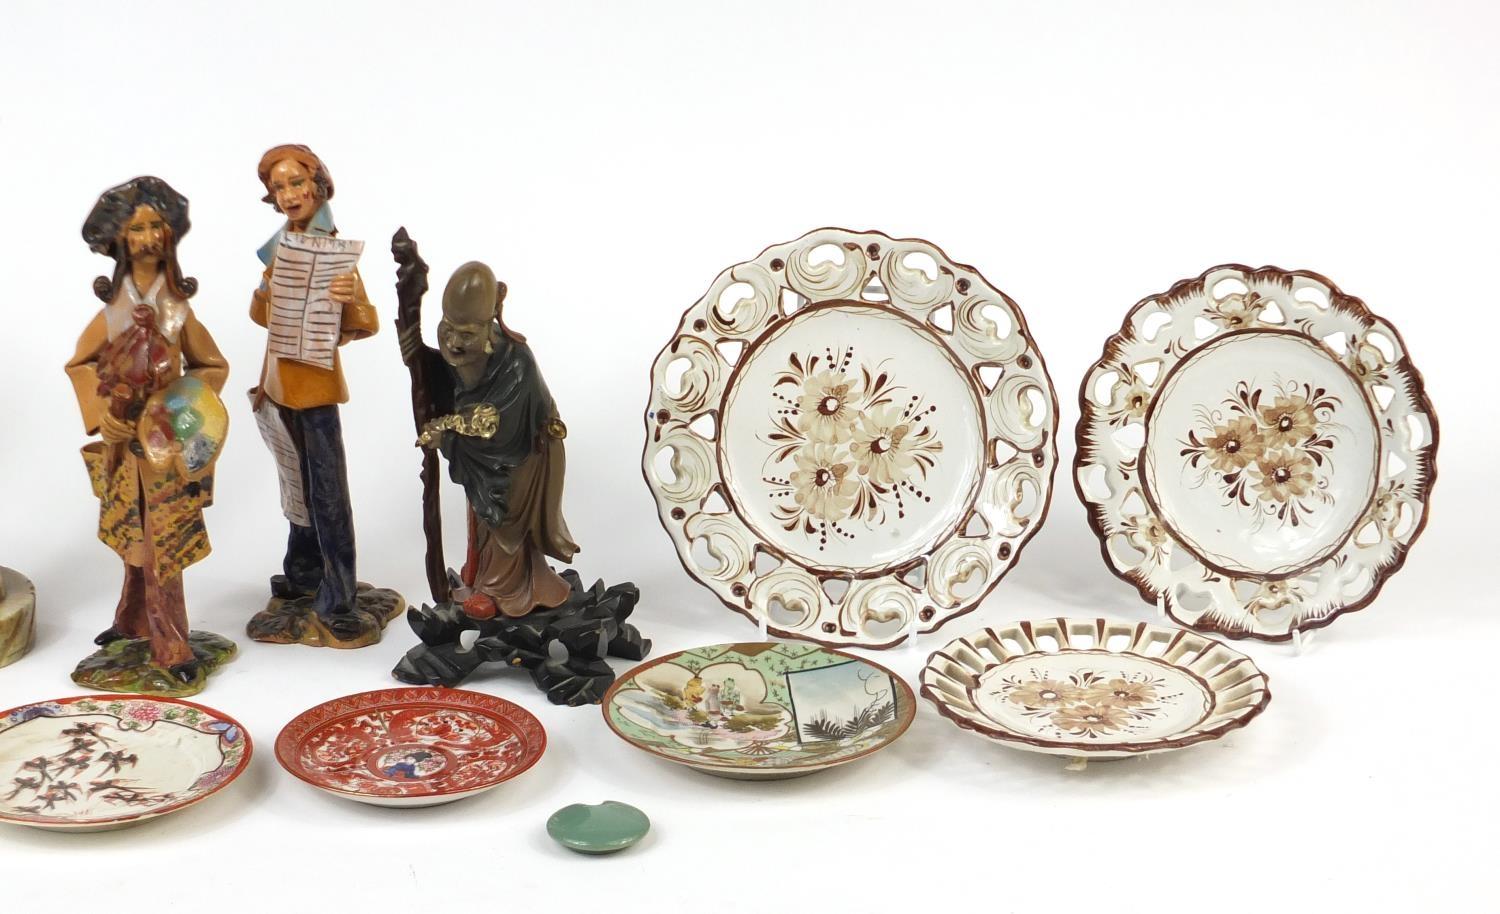 Decorative figures and plates including Italian pottery figures, carved onyx Chinese figures and - Image 3 of 7